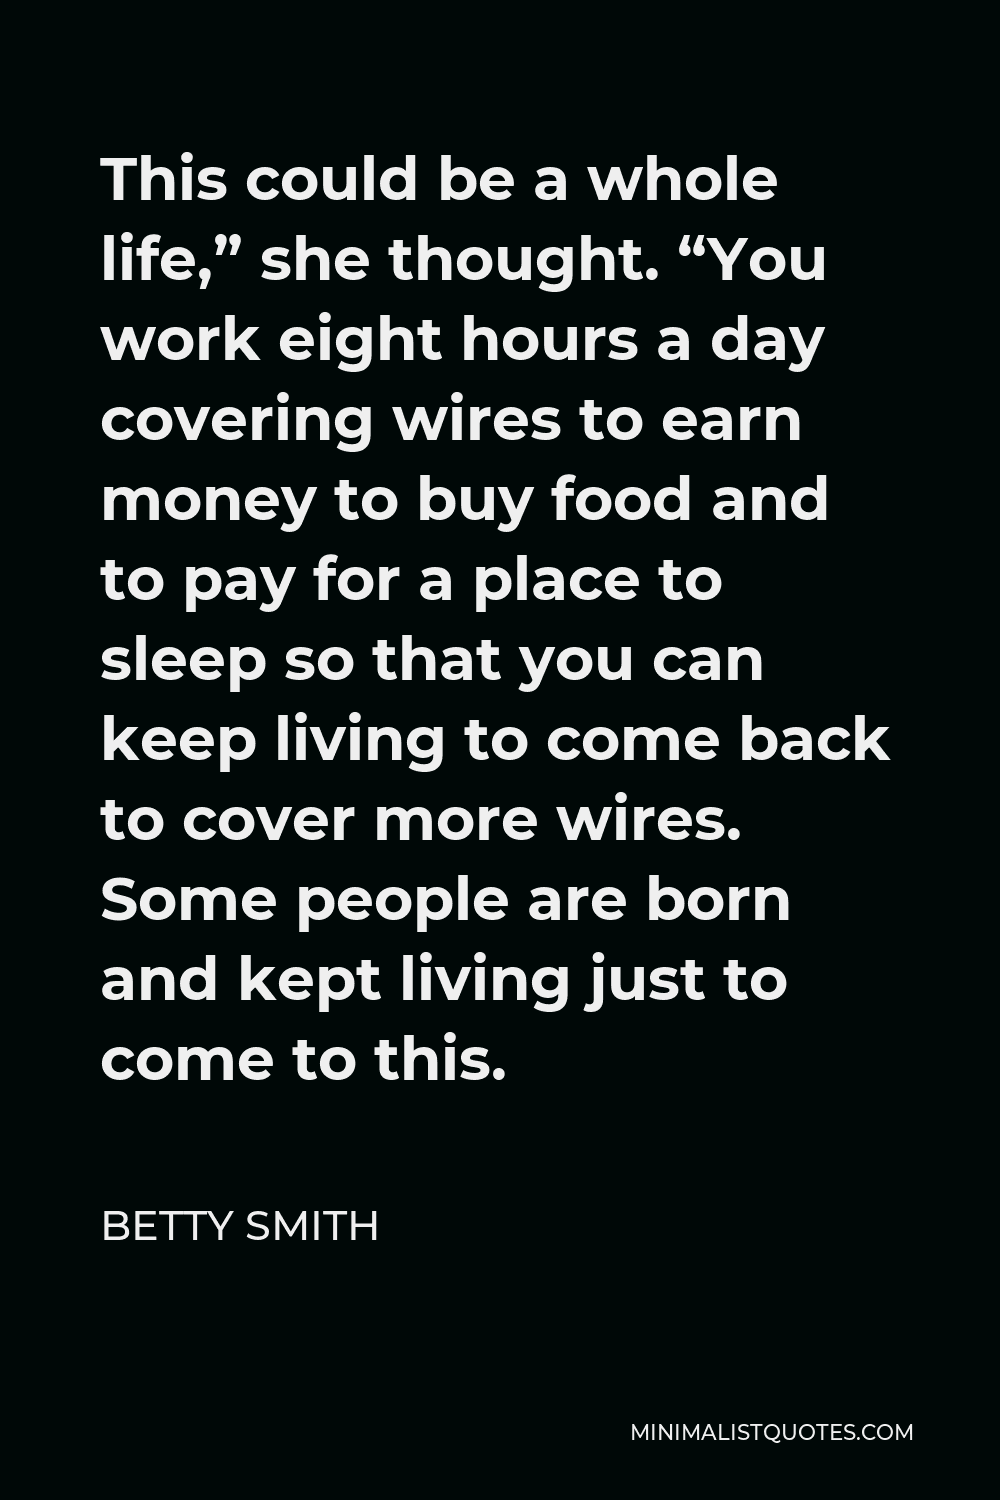 Betty Smith Quote - This could be a whole life,” she thought. “You work eight hours a day covering wires to earn money to buy food and to pay for a place to sleep so that you can keep living to come back to cover more wires. Some people are born and kept living just to come to this.